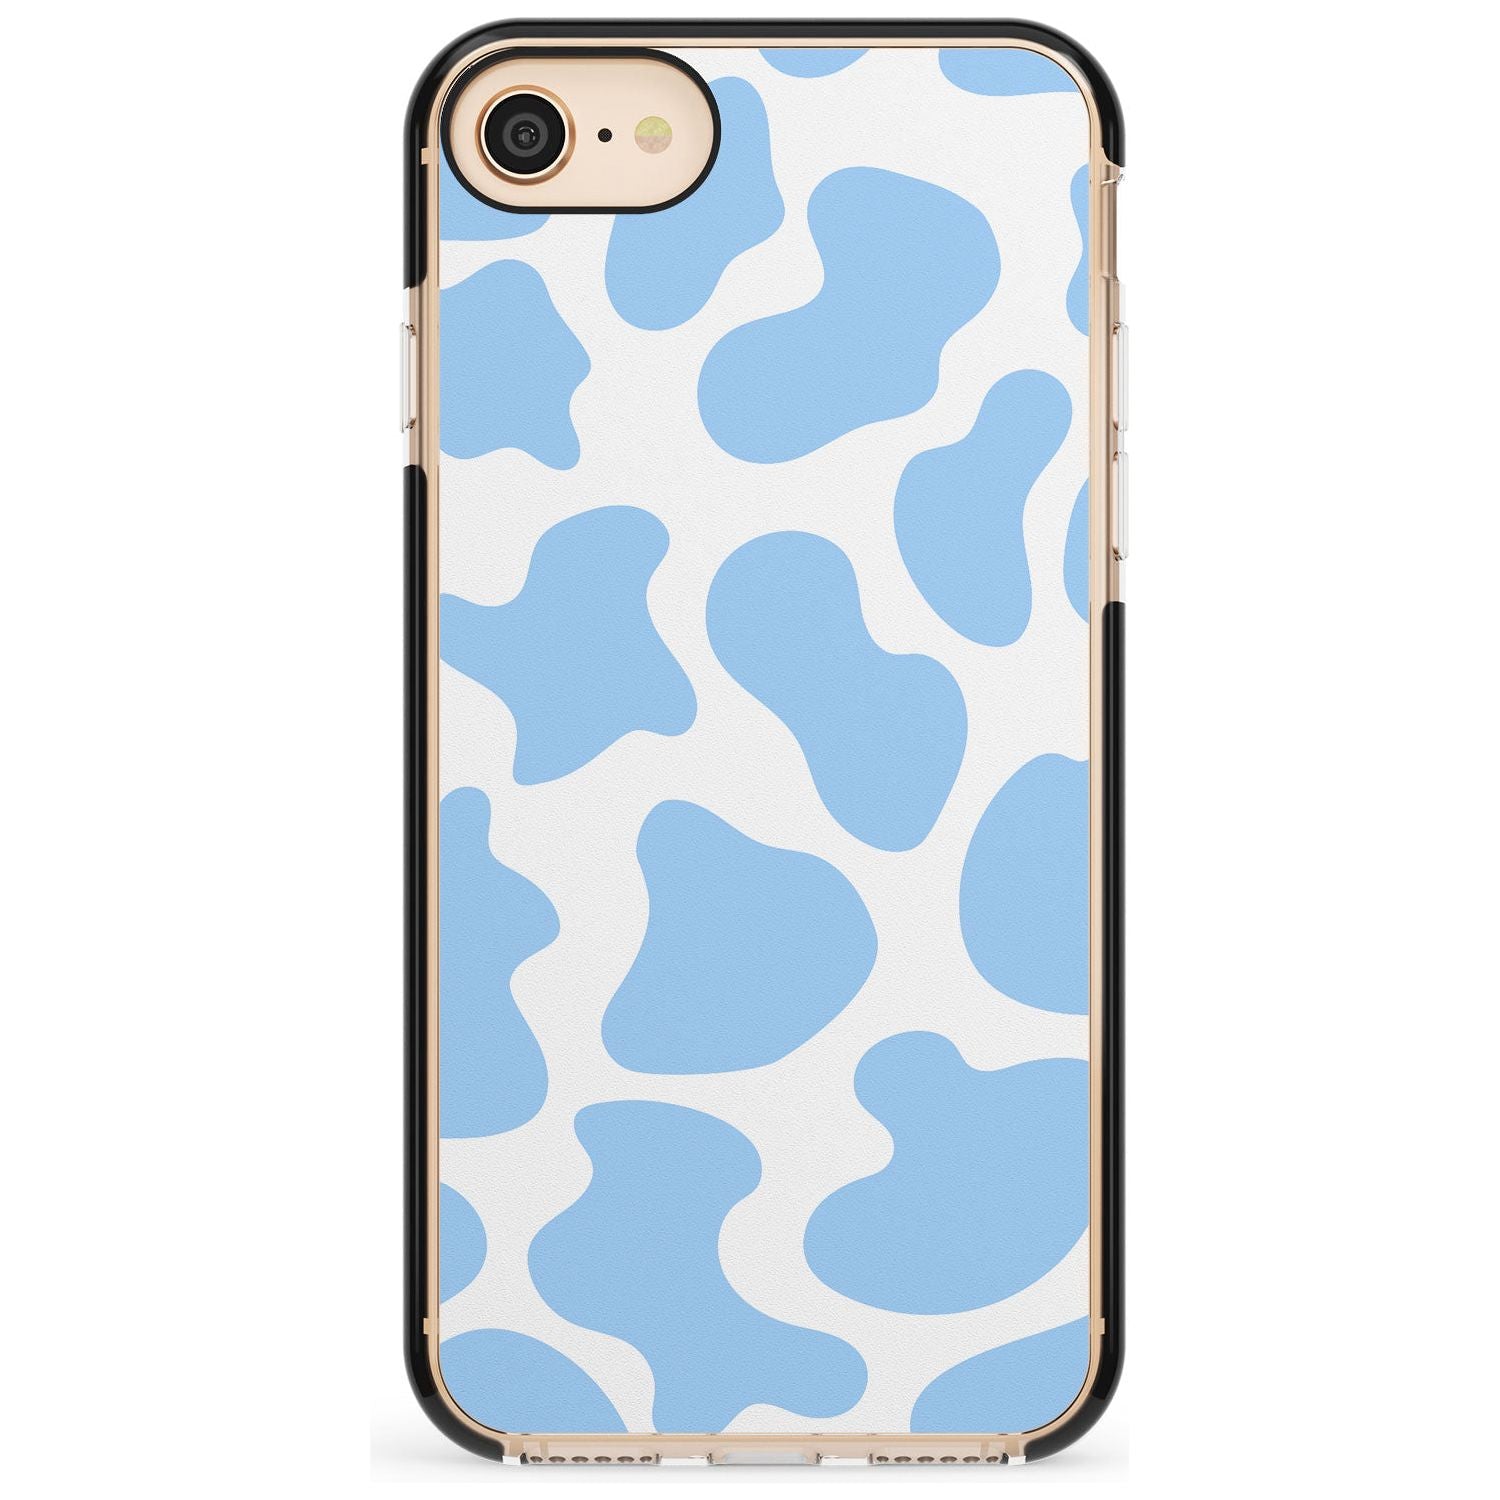 Blue and White Cow Print Black Impact Phone Case for iPhone SE 8 7 Plus